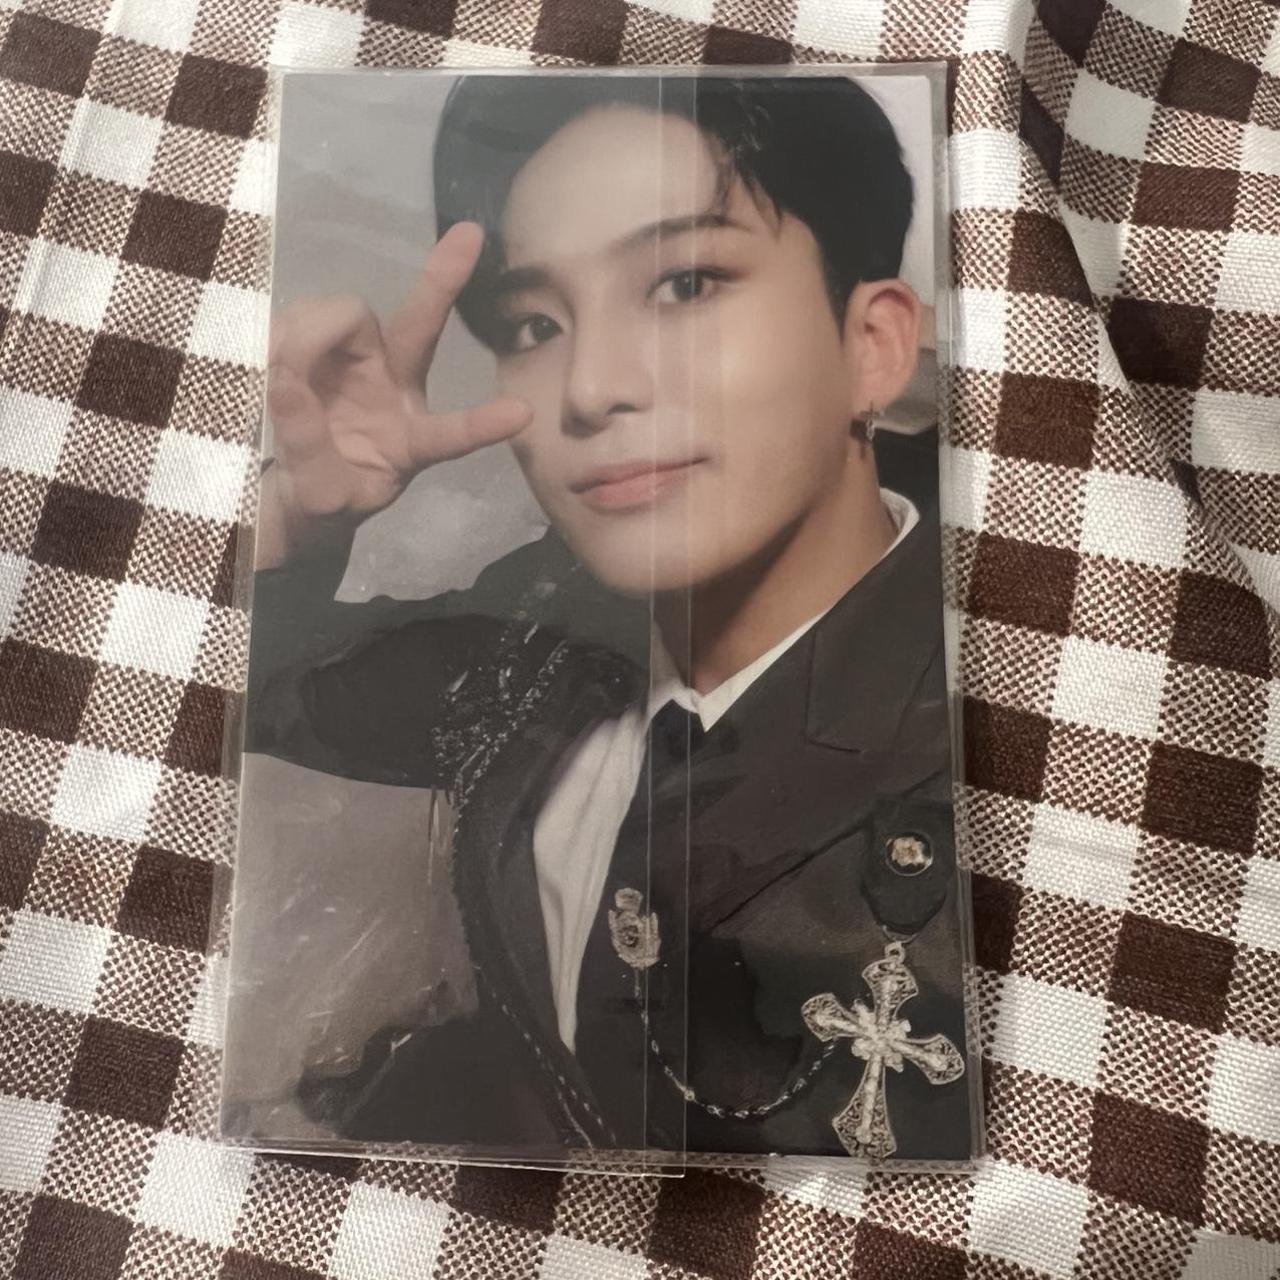 WTS: ATEEZ POSTER Price: $ 9 ❌✓ Please message me - Depop